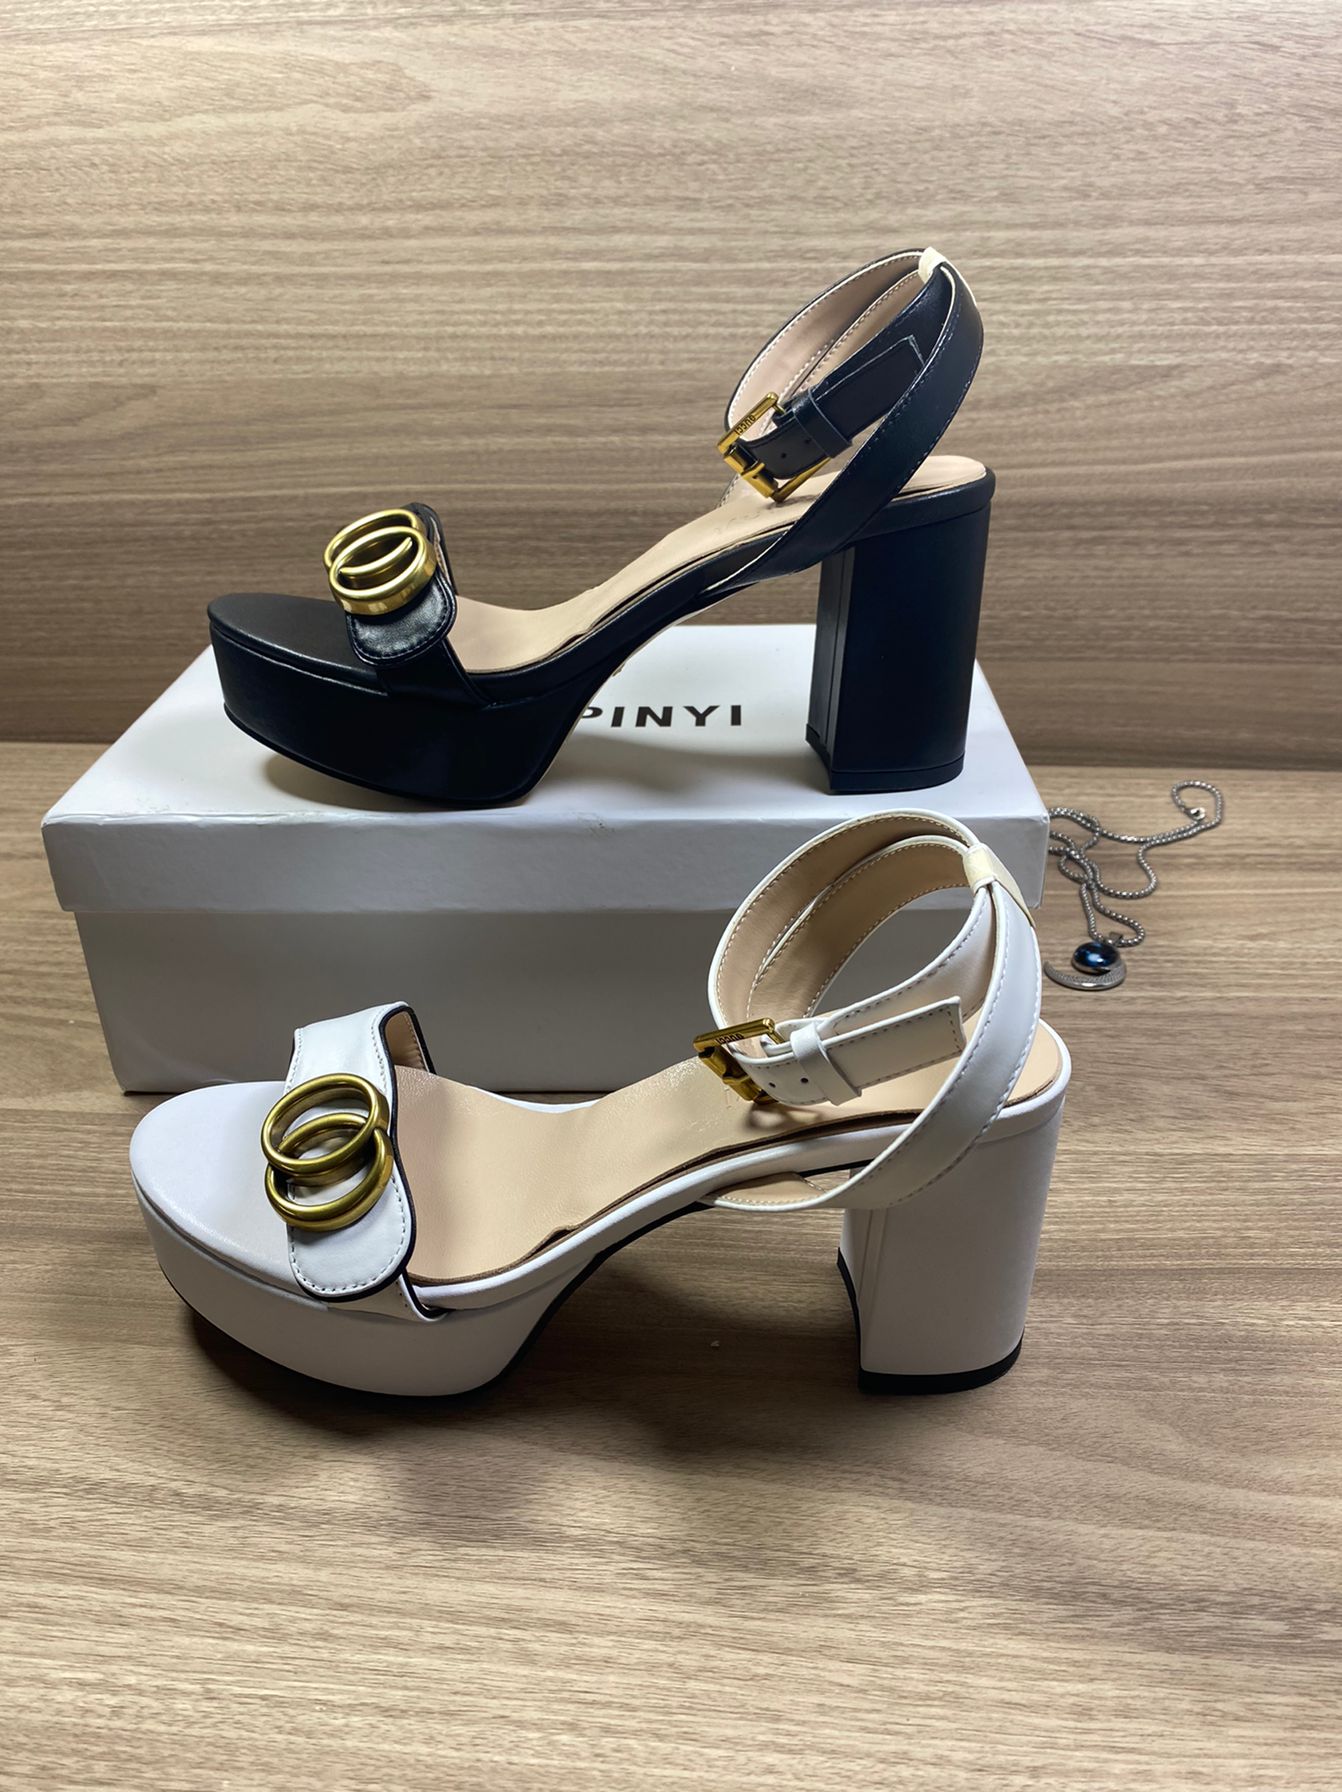 designer shoes womens Sandals Formal sandal Thick heeled high heels 100% leather party Dance shoe Lady Metal Belt buckle High Heel Woman shoes Large size 35-42 With box